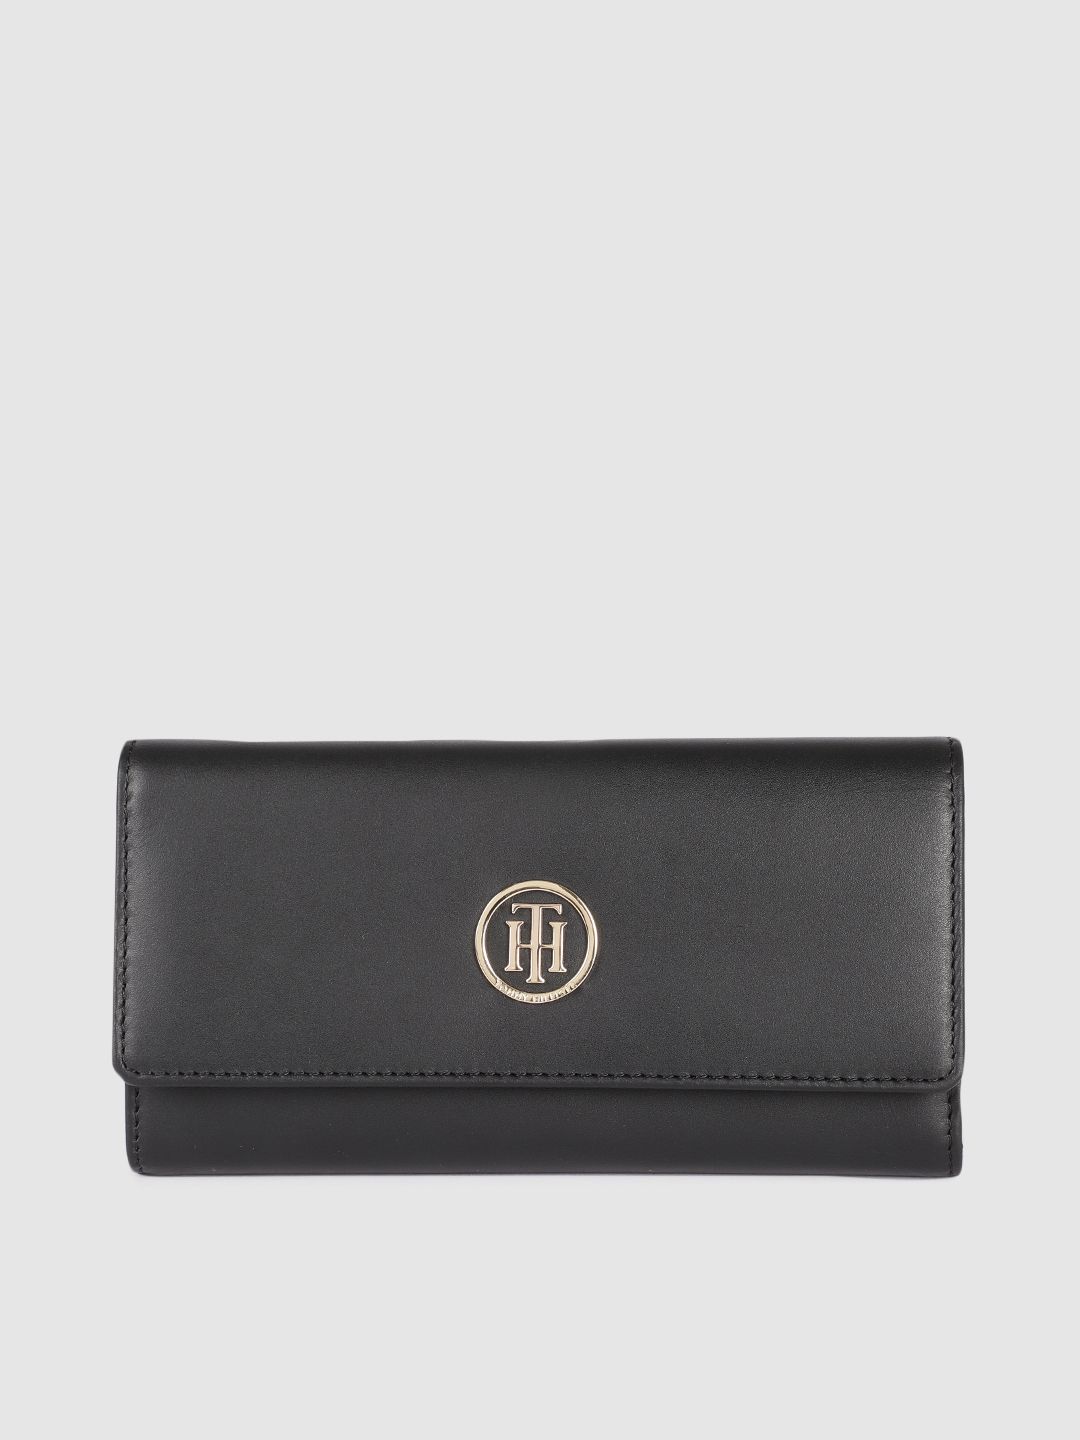 Tommy Hilfiger Women Black Leather Three Fold Wallet Price in India